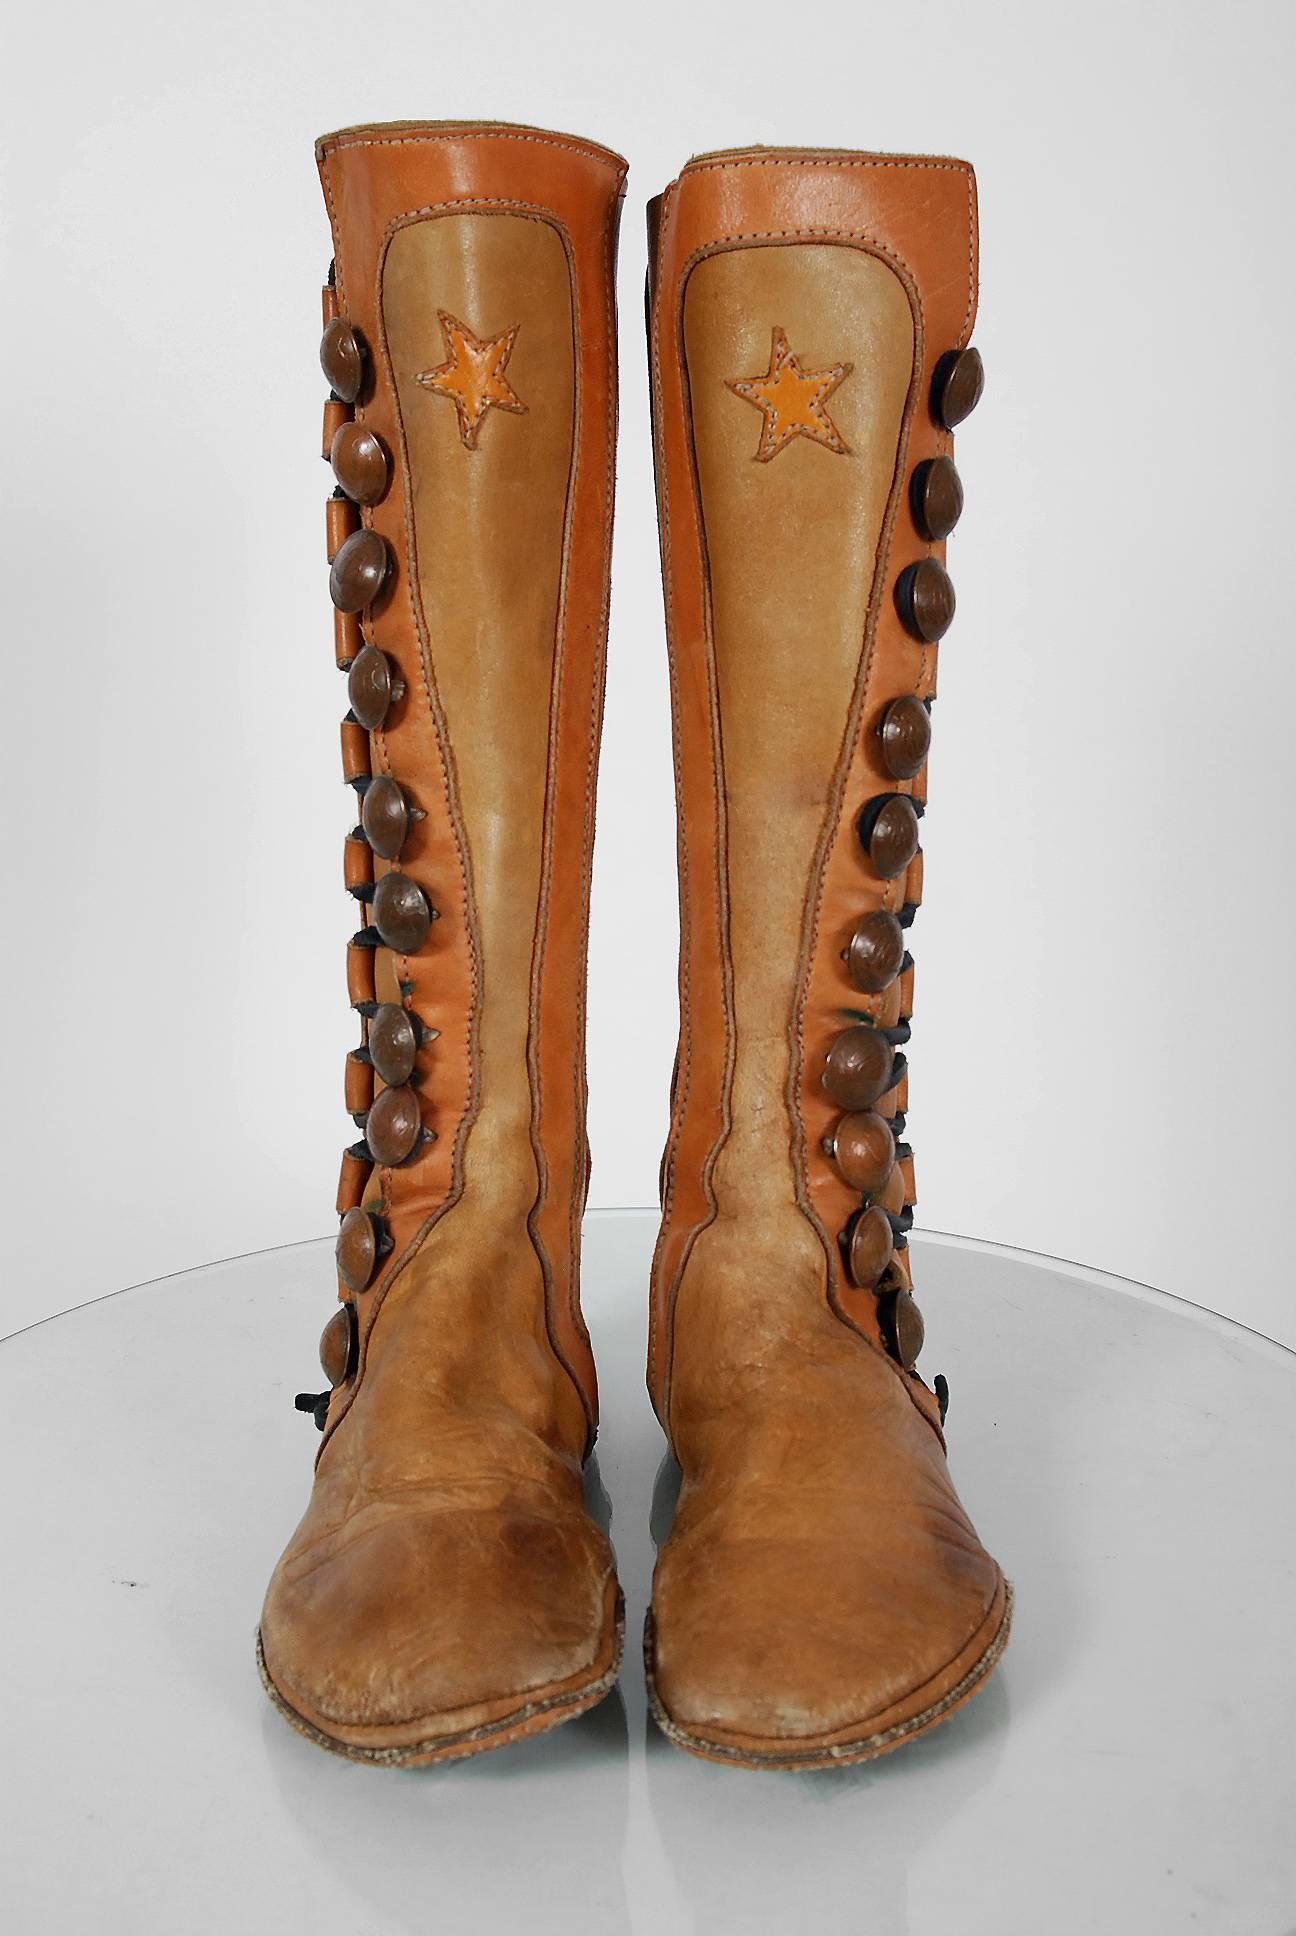 Sensational 1960's handmade bohemian flat moccasin boots in the most amazing knee-high style! The leather used is an ultra-soft buffalo hide in complementary brown hues. I love the genuine buffalo nickel buttons and unique star-novelty applique